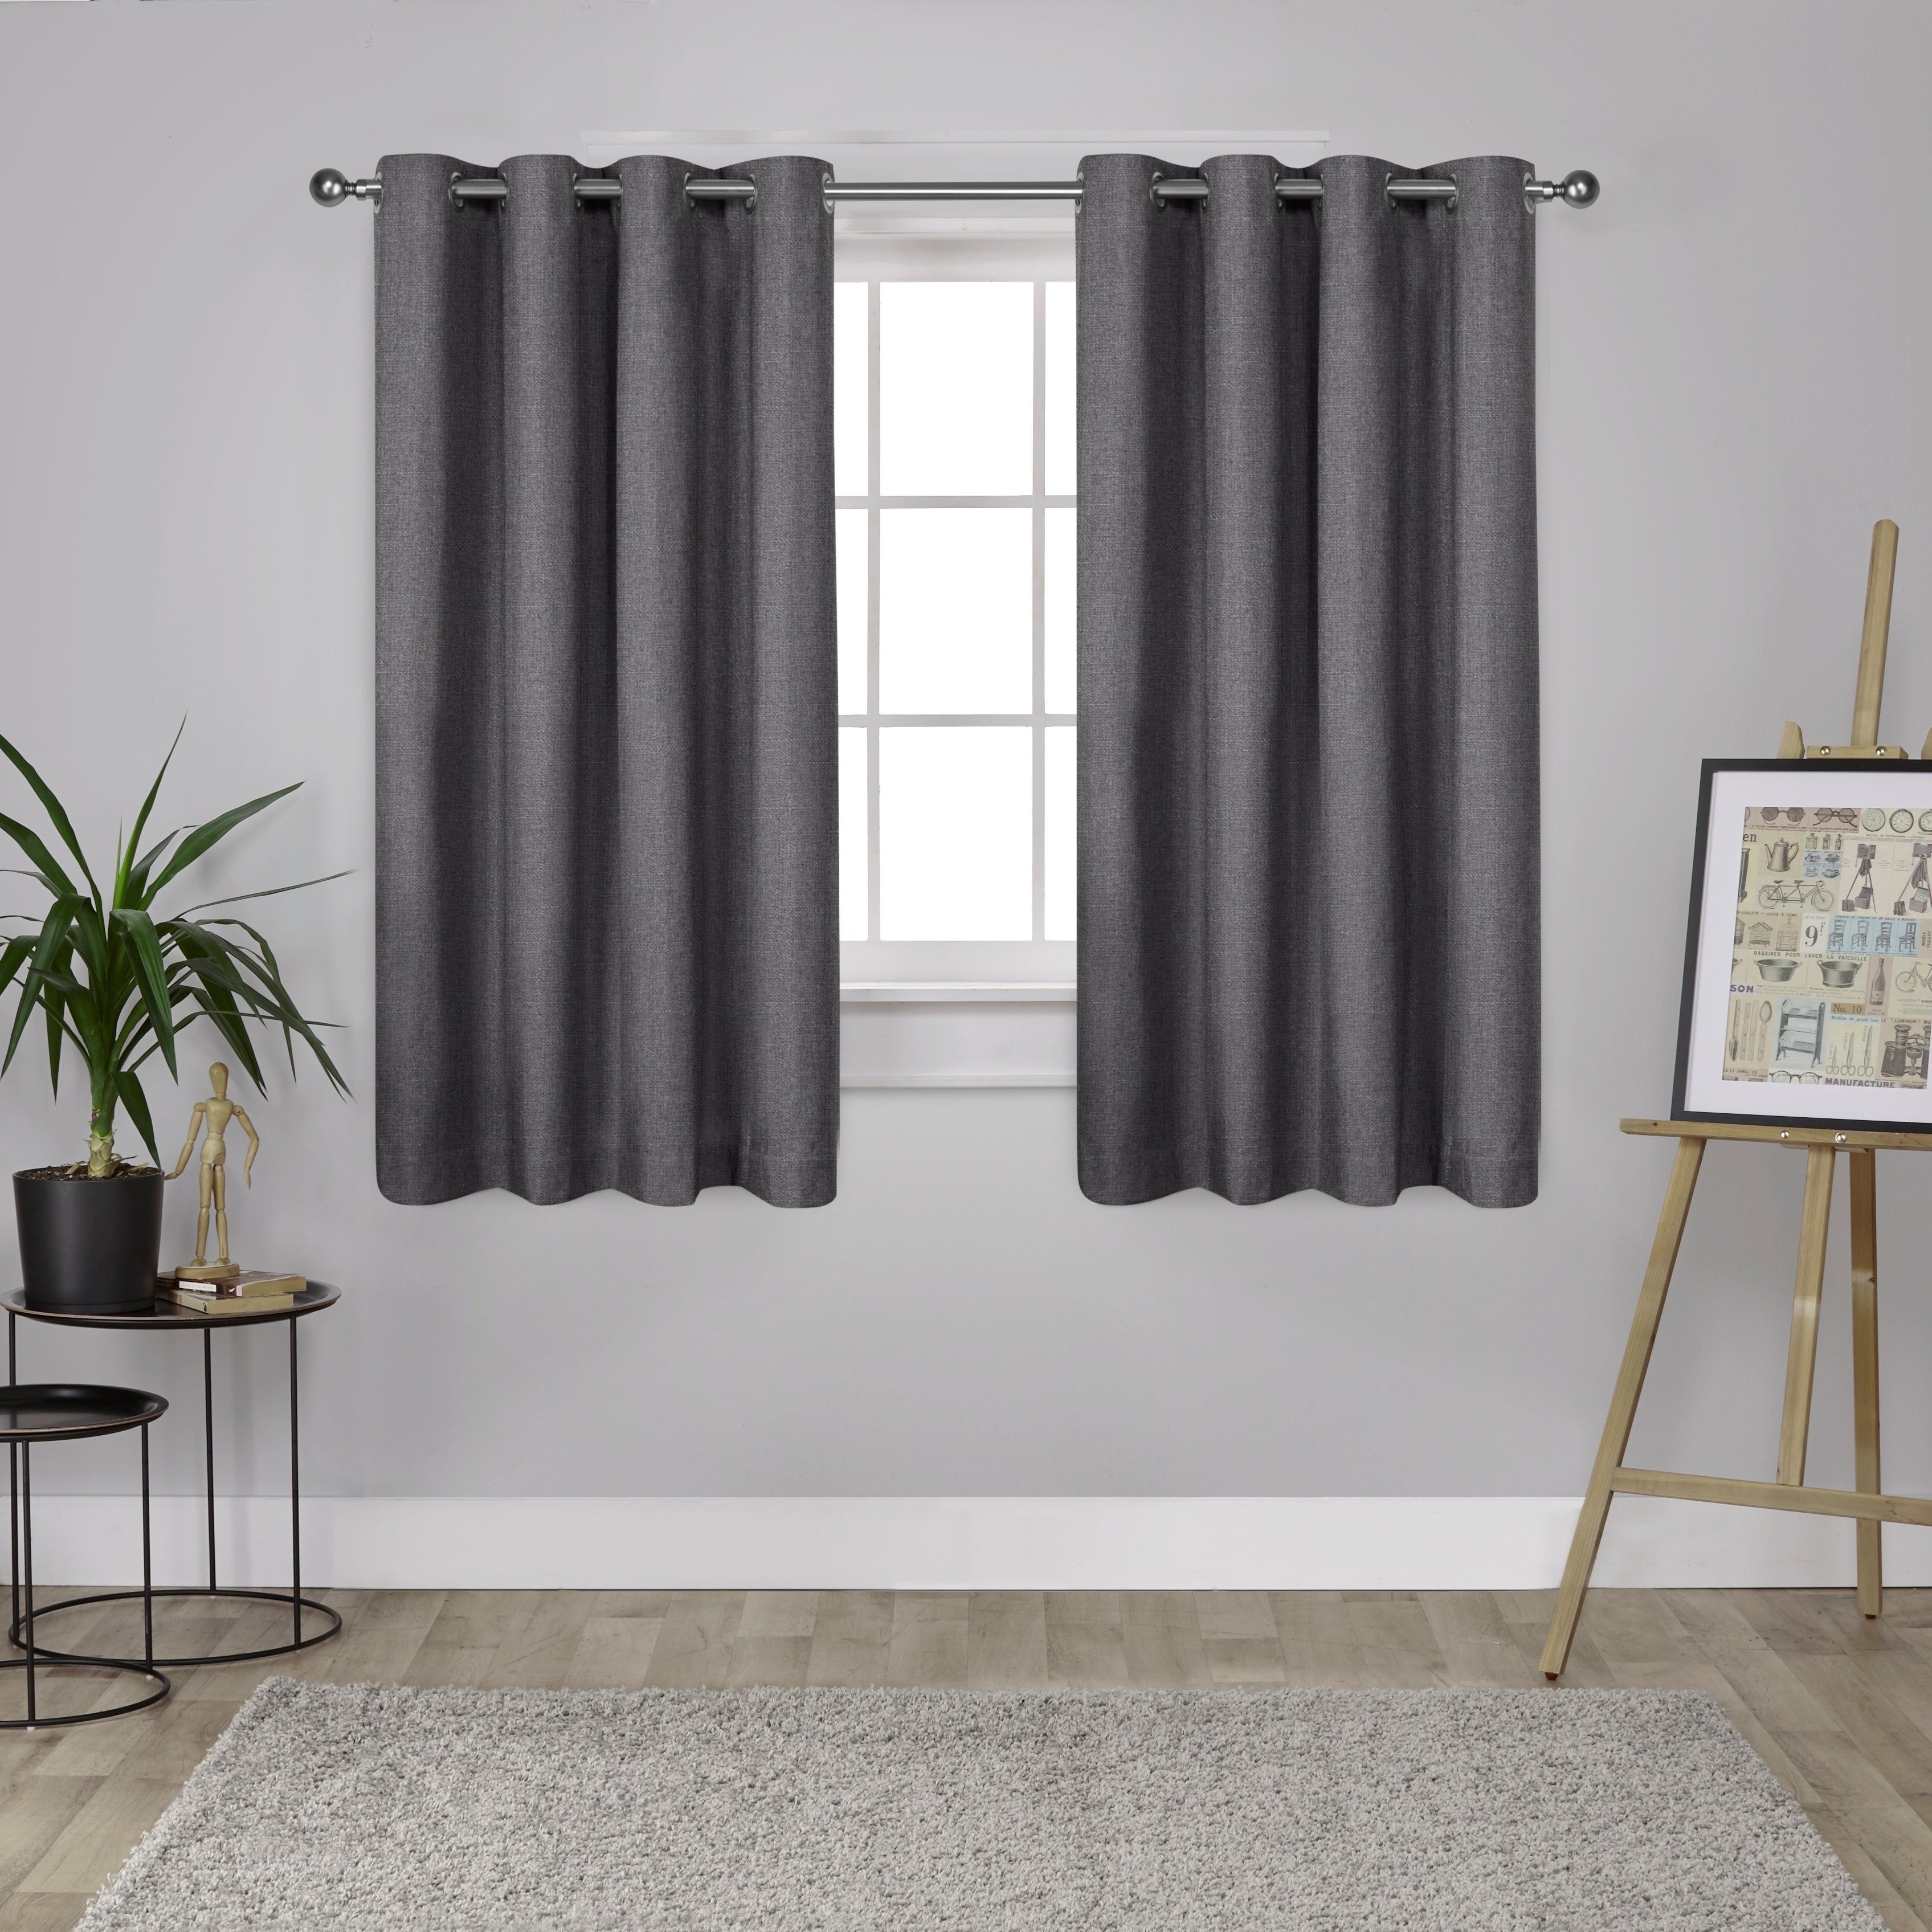 Porch & Den Sugar Creek Grommet Top Loha Linen Window Curtain Panel Pair In  Winter White (52x63)(as Is Item) | Overstock Shopping – The Best Deals Regarding Sugar Creek Grommet Top Loha Linen Window Curtain Panel Pairs (View 19 of 30)